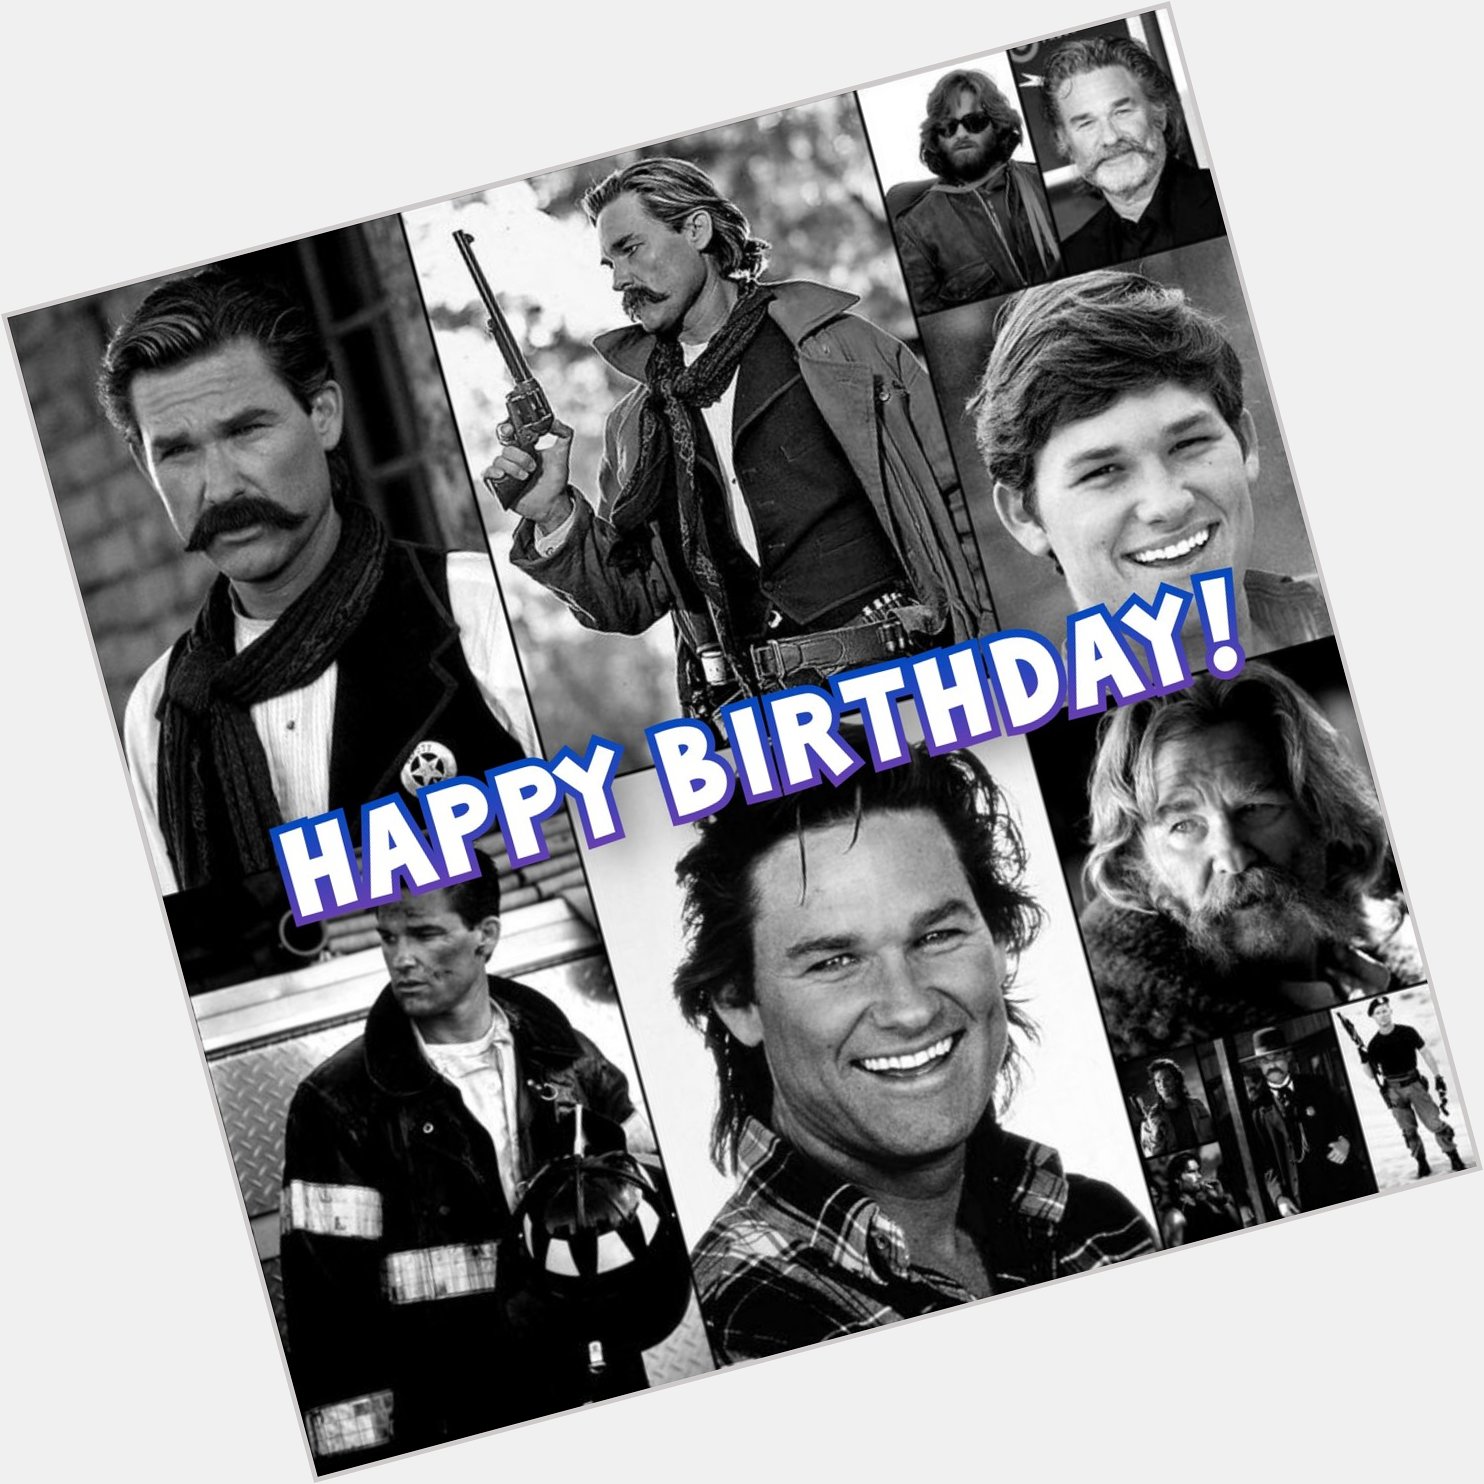 Happy Birthday to Kurt Russell!

Any favorite roles of his?  